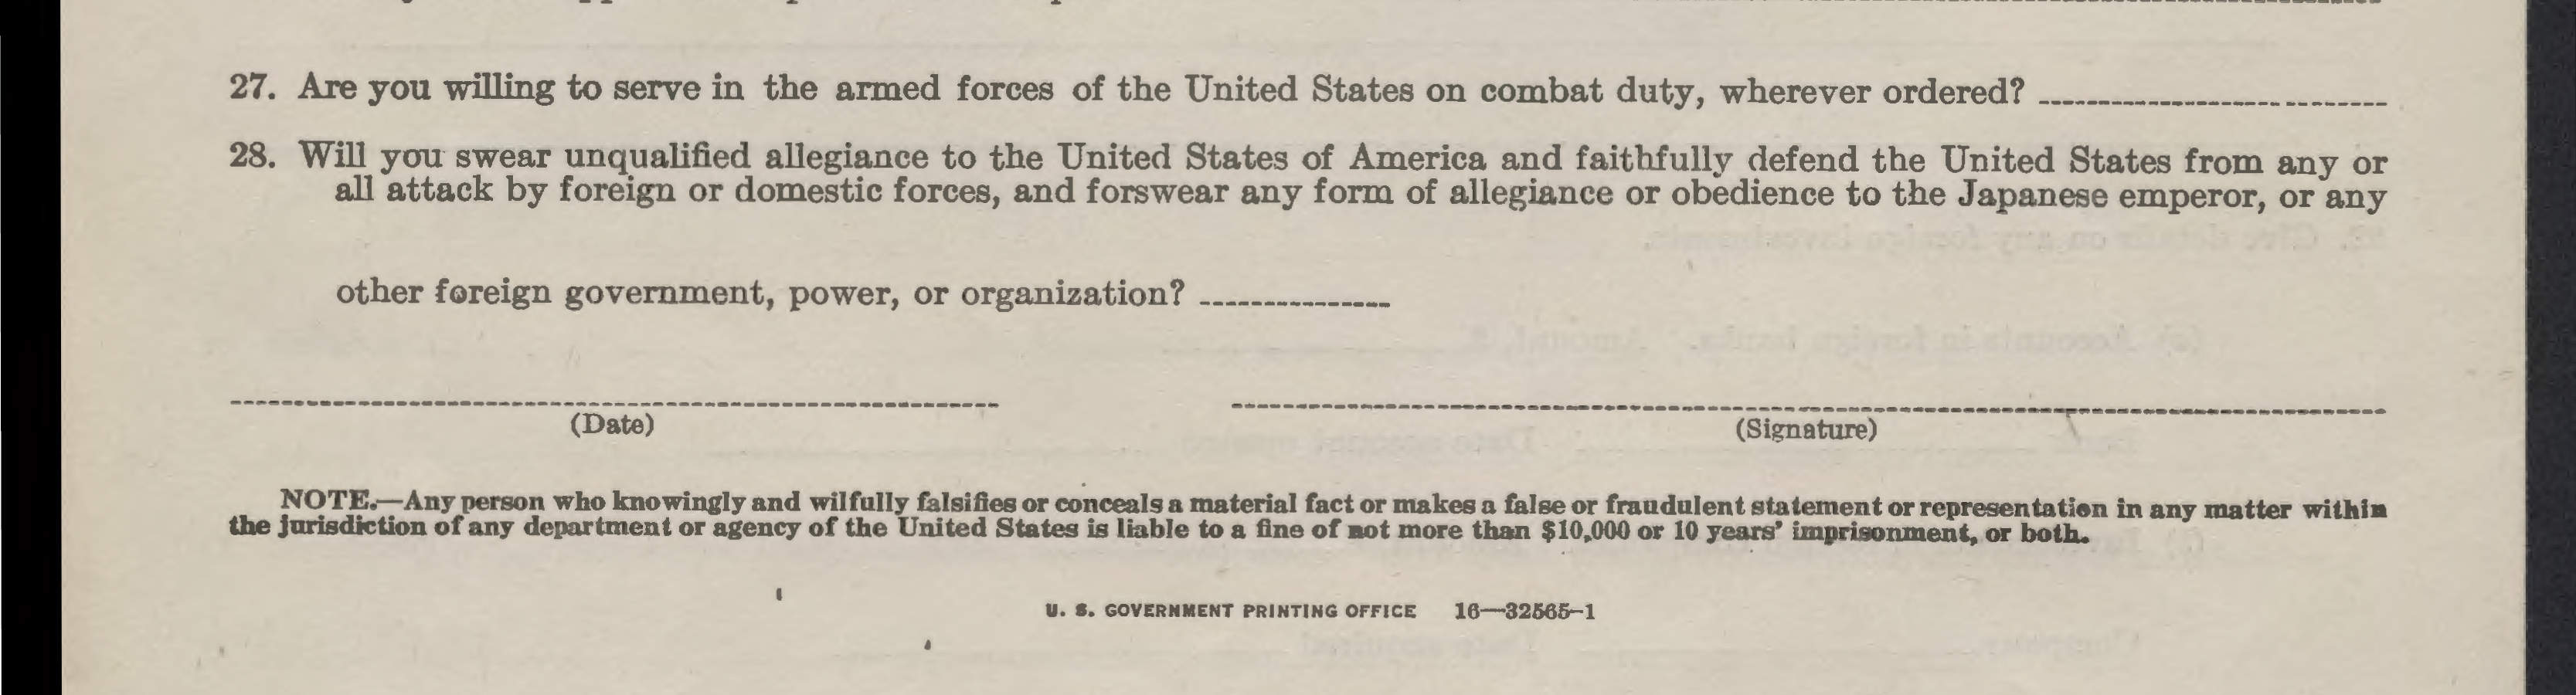 A paper with two questions: "27. Are you willing to serve in the armed forces of the United States on combat duty, wherever ordered? 28. Will you swear unqualified allegiance to the United States of America and forswear any form of allegiance to Japan?"